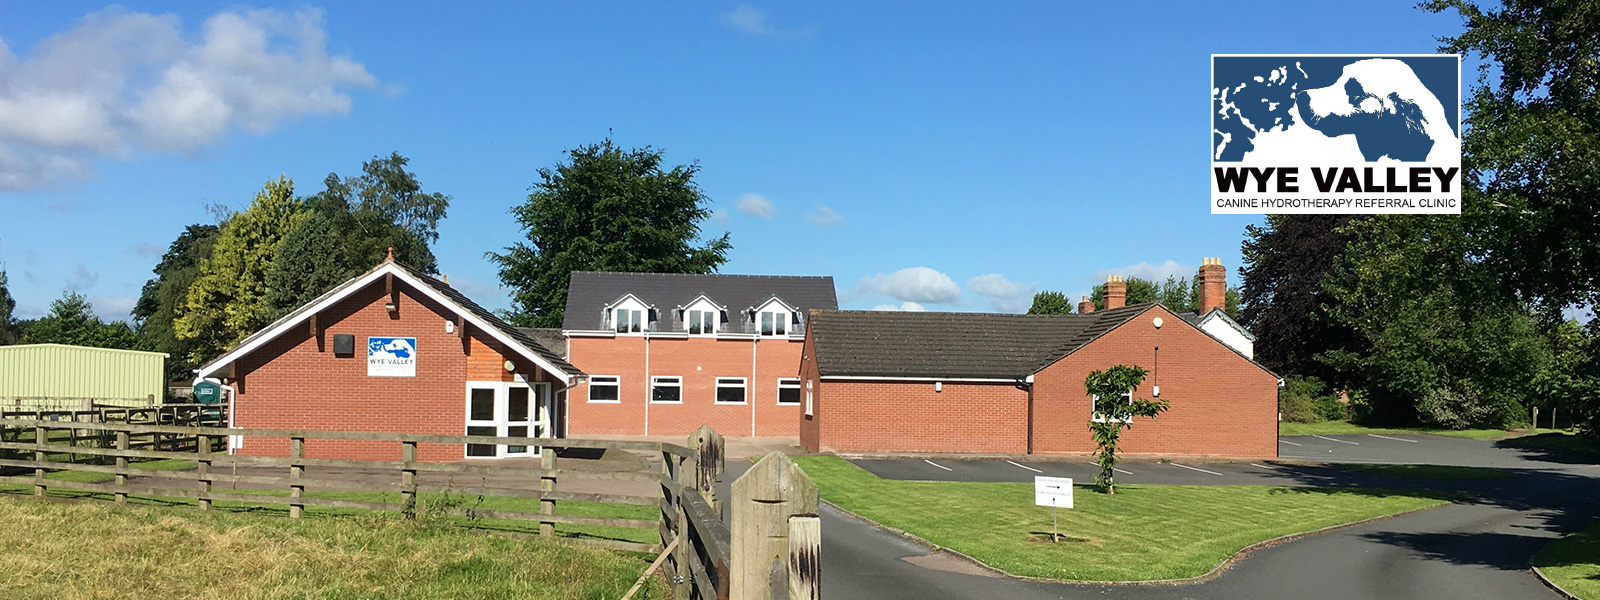 Wye Valley Cat Hydrotherapy Centre